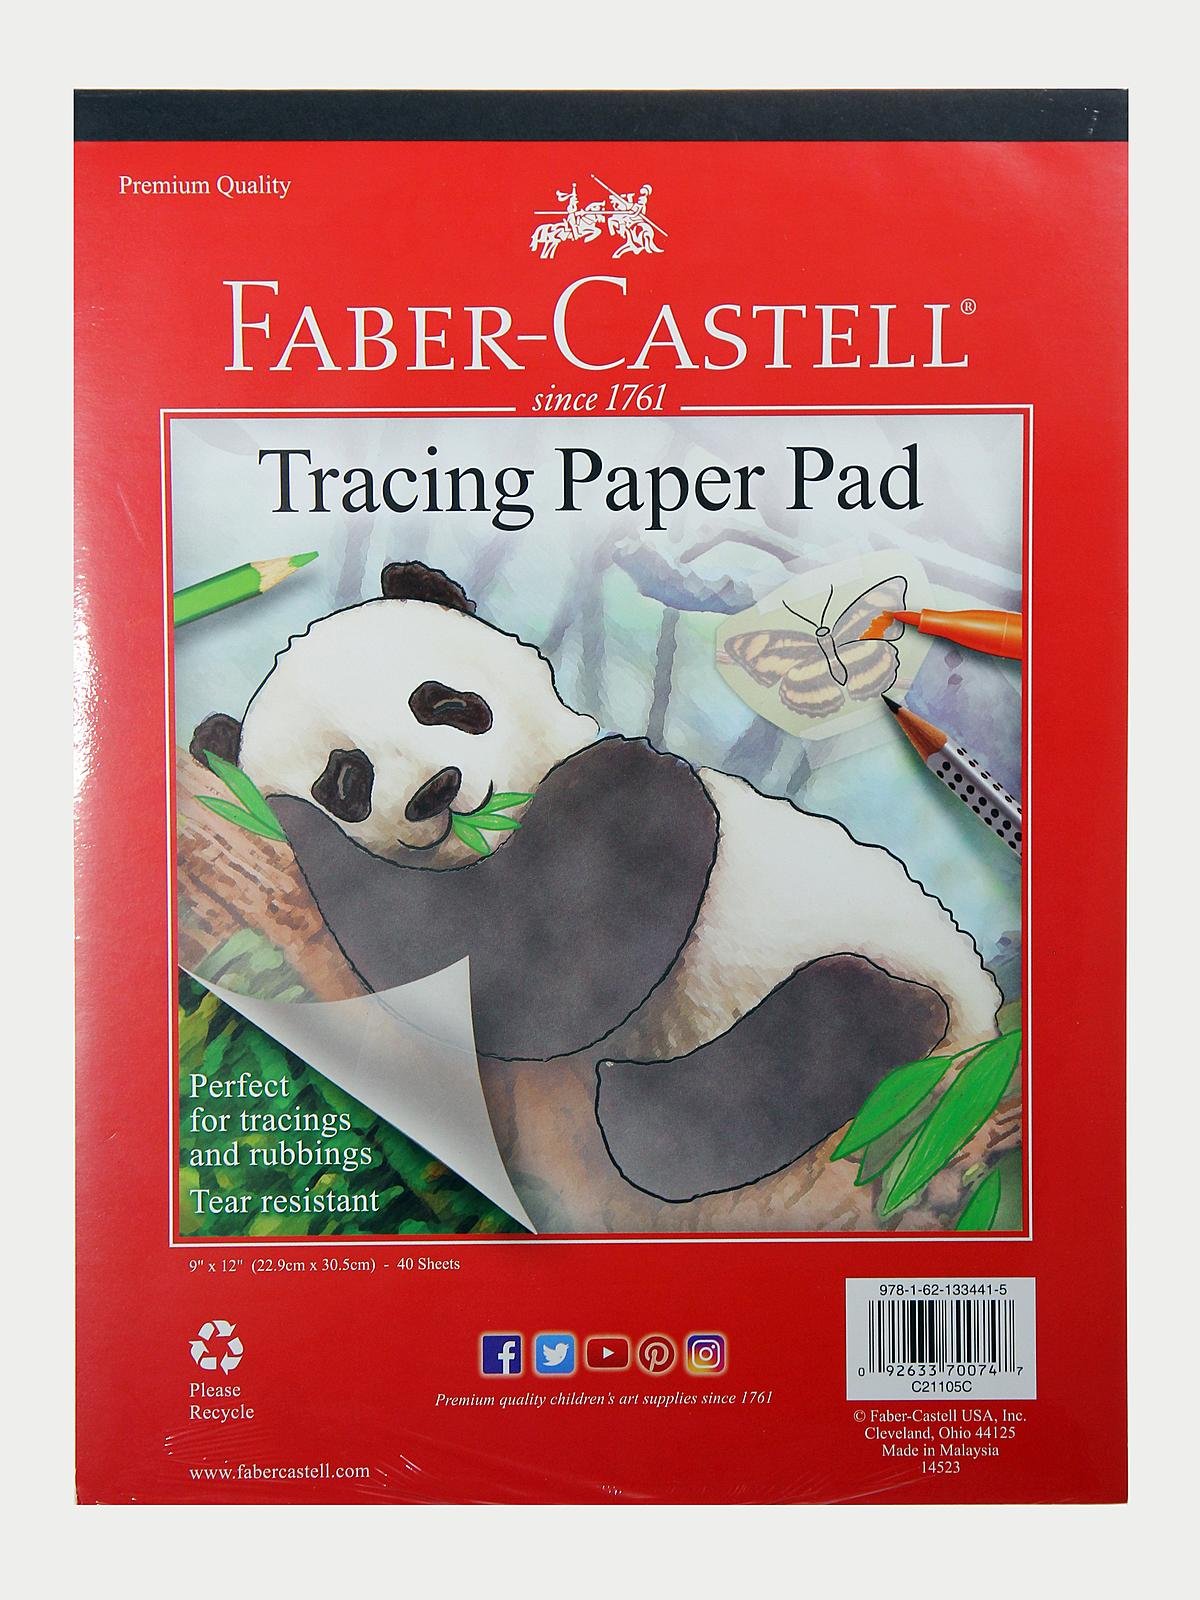 Faber-Castell - Tracing Paper Pad